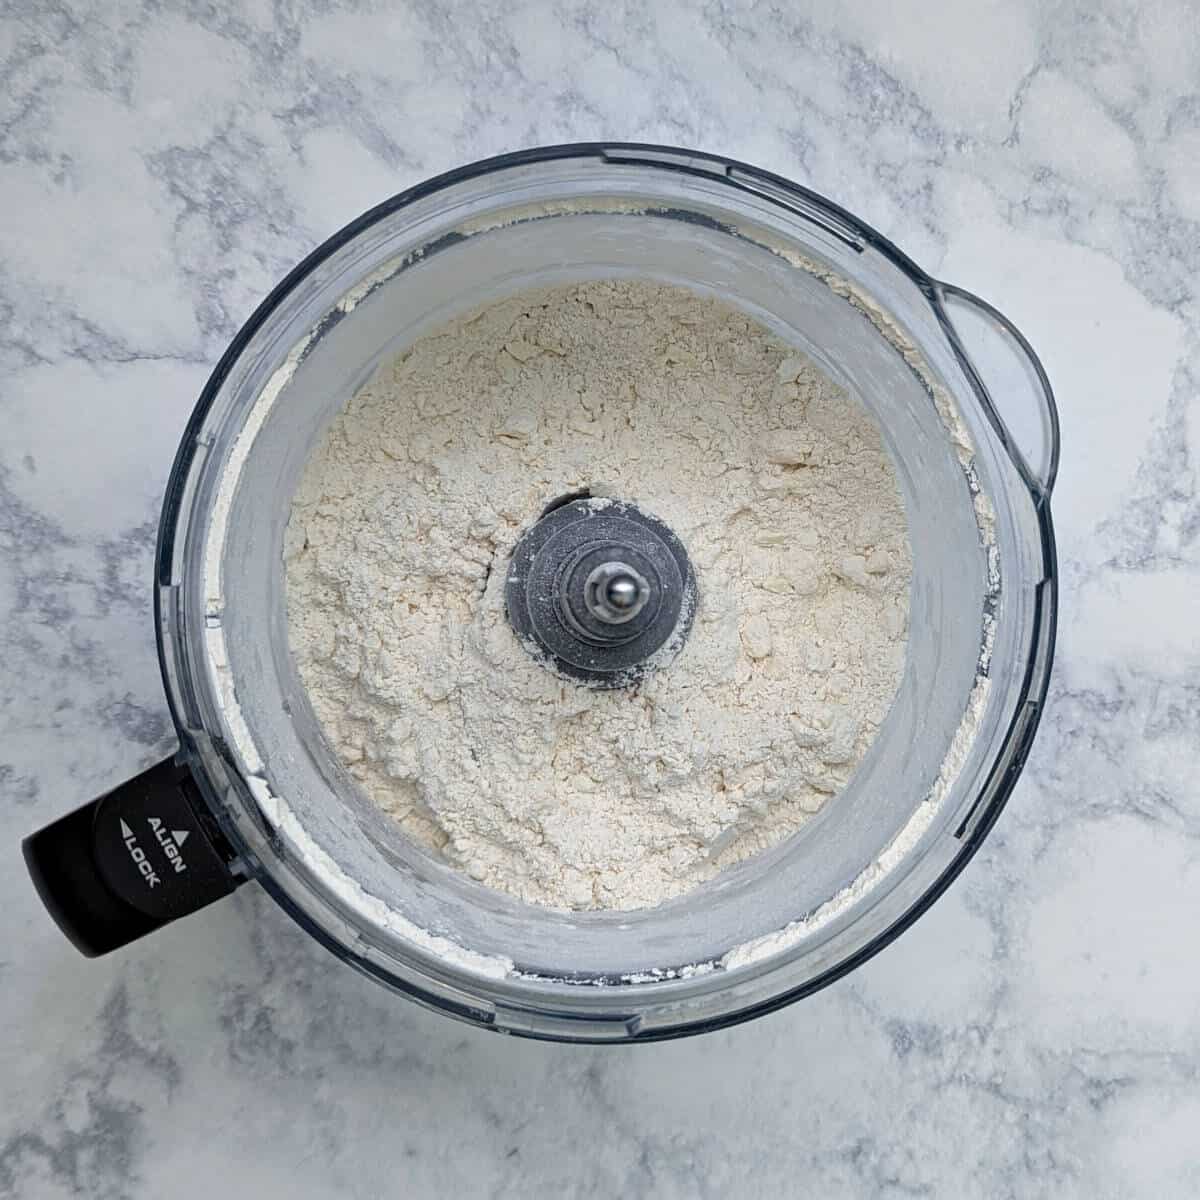 dry ingredients for pie crust, in a food processor